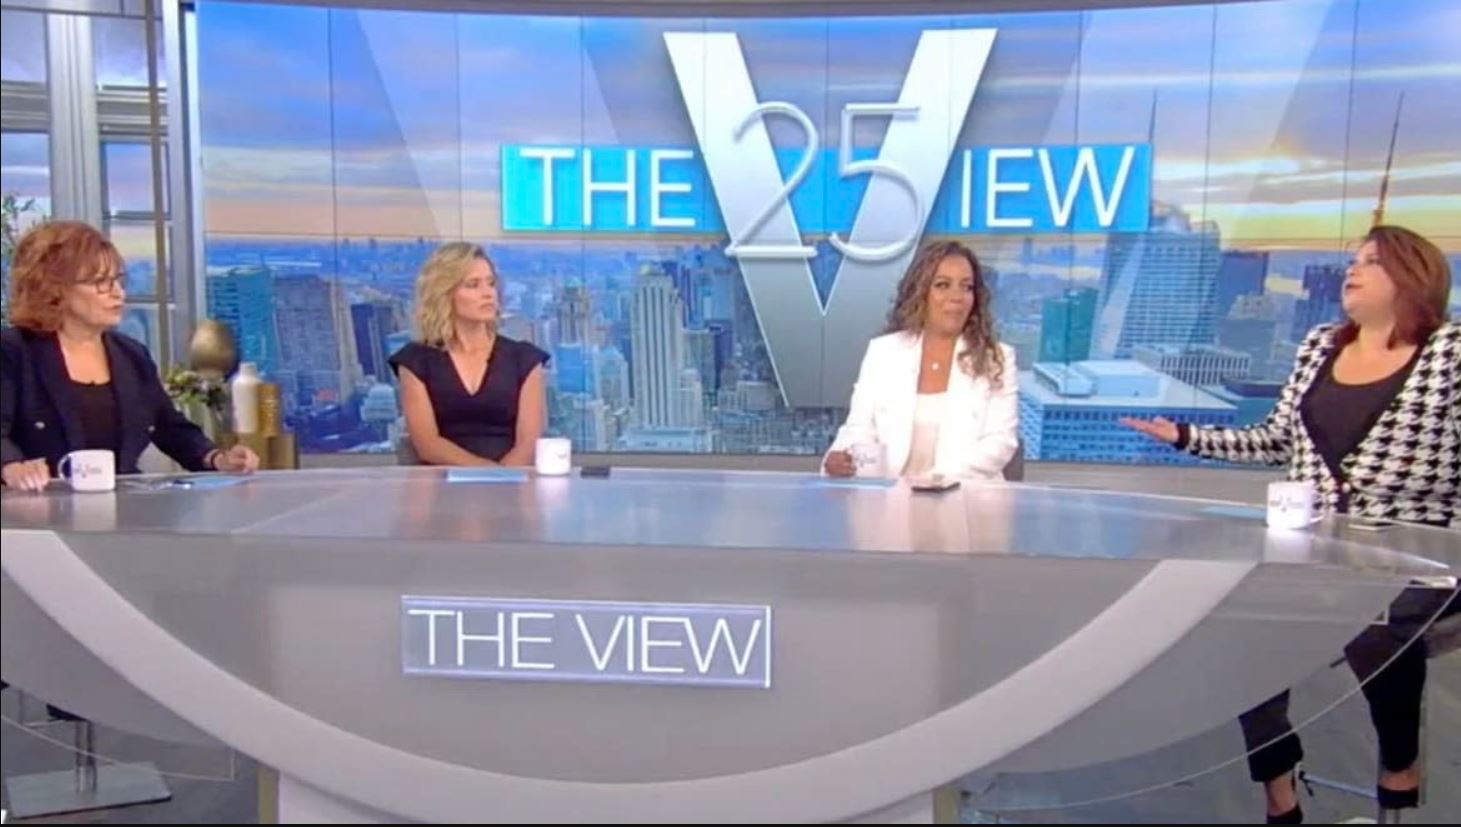 UPDATED: 2 'The View' Co-Hosts Test Positive for Covid During Show 1